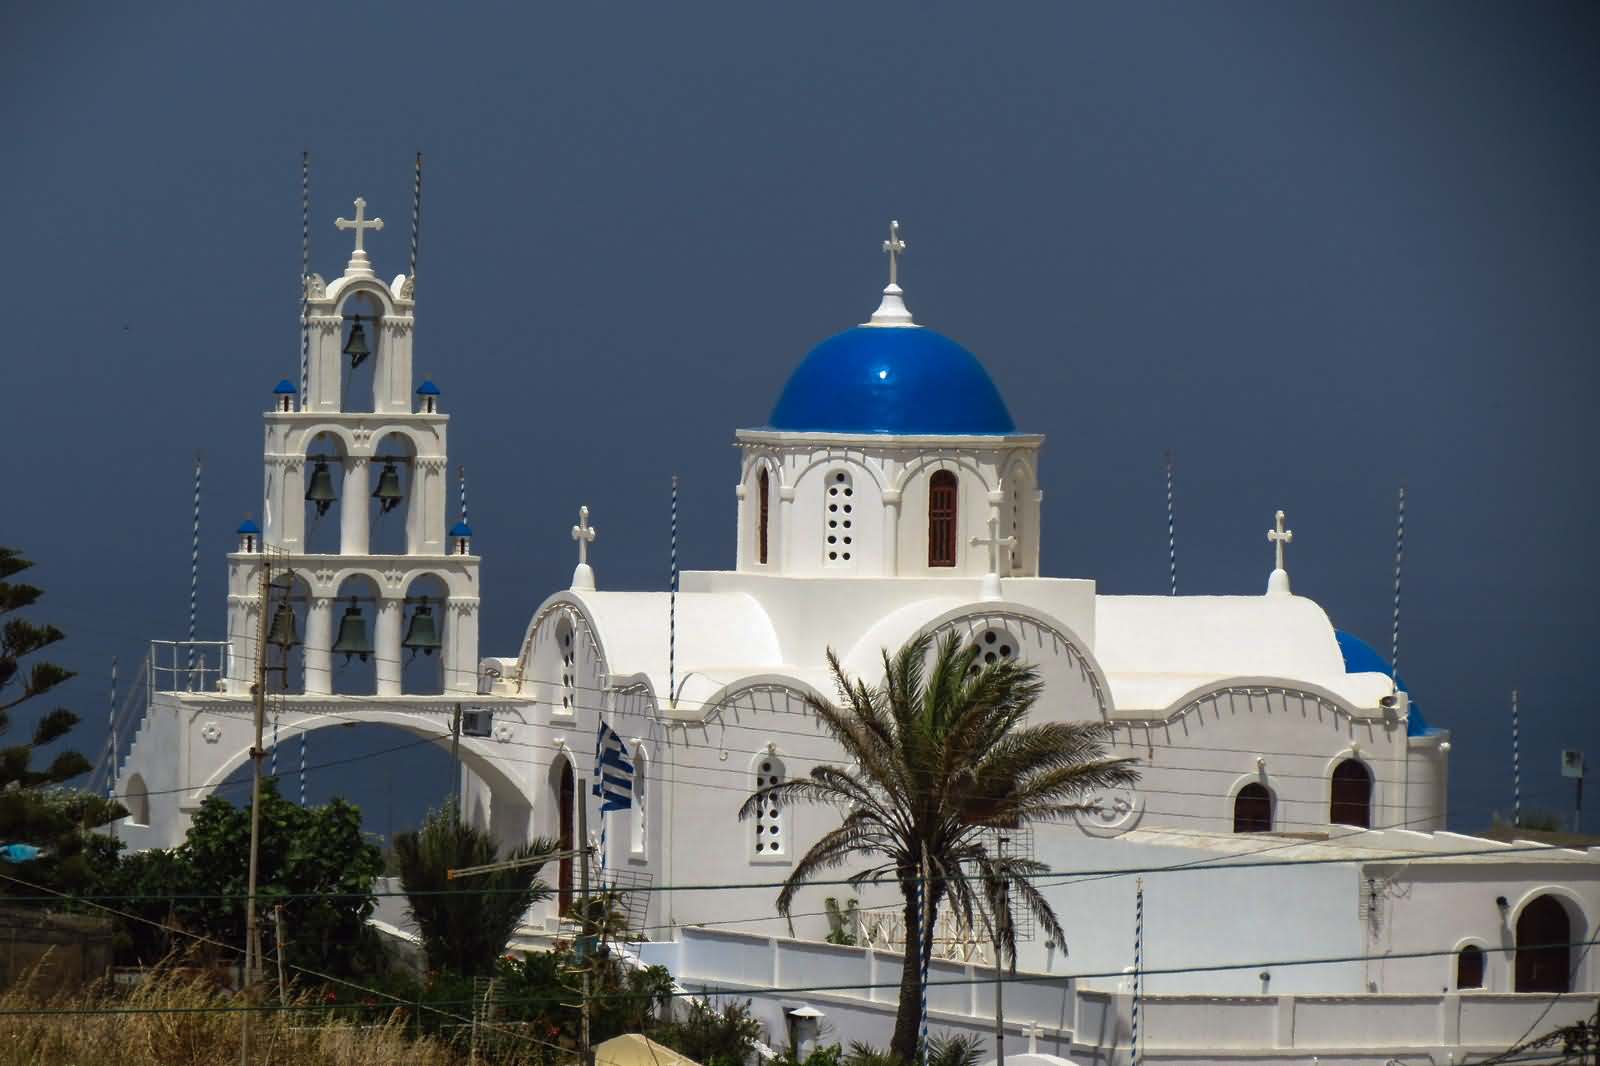 Bells And Blue Dome Church In Santorini